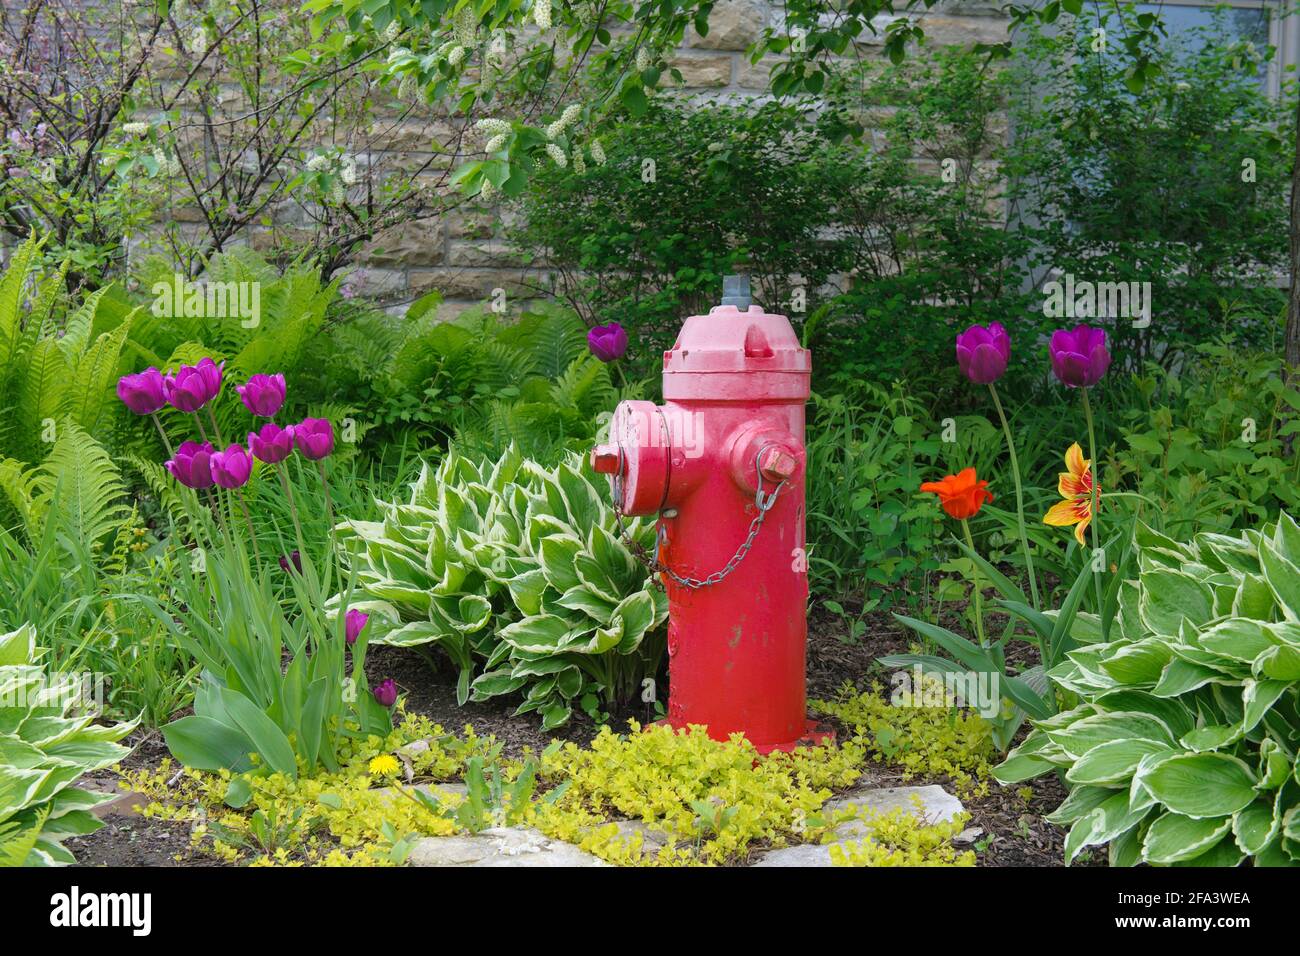 Red fire hydrant in a flowerbed. Stock Photo